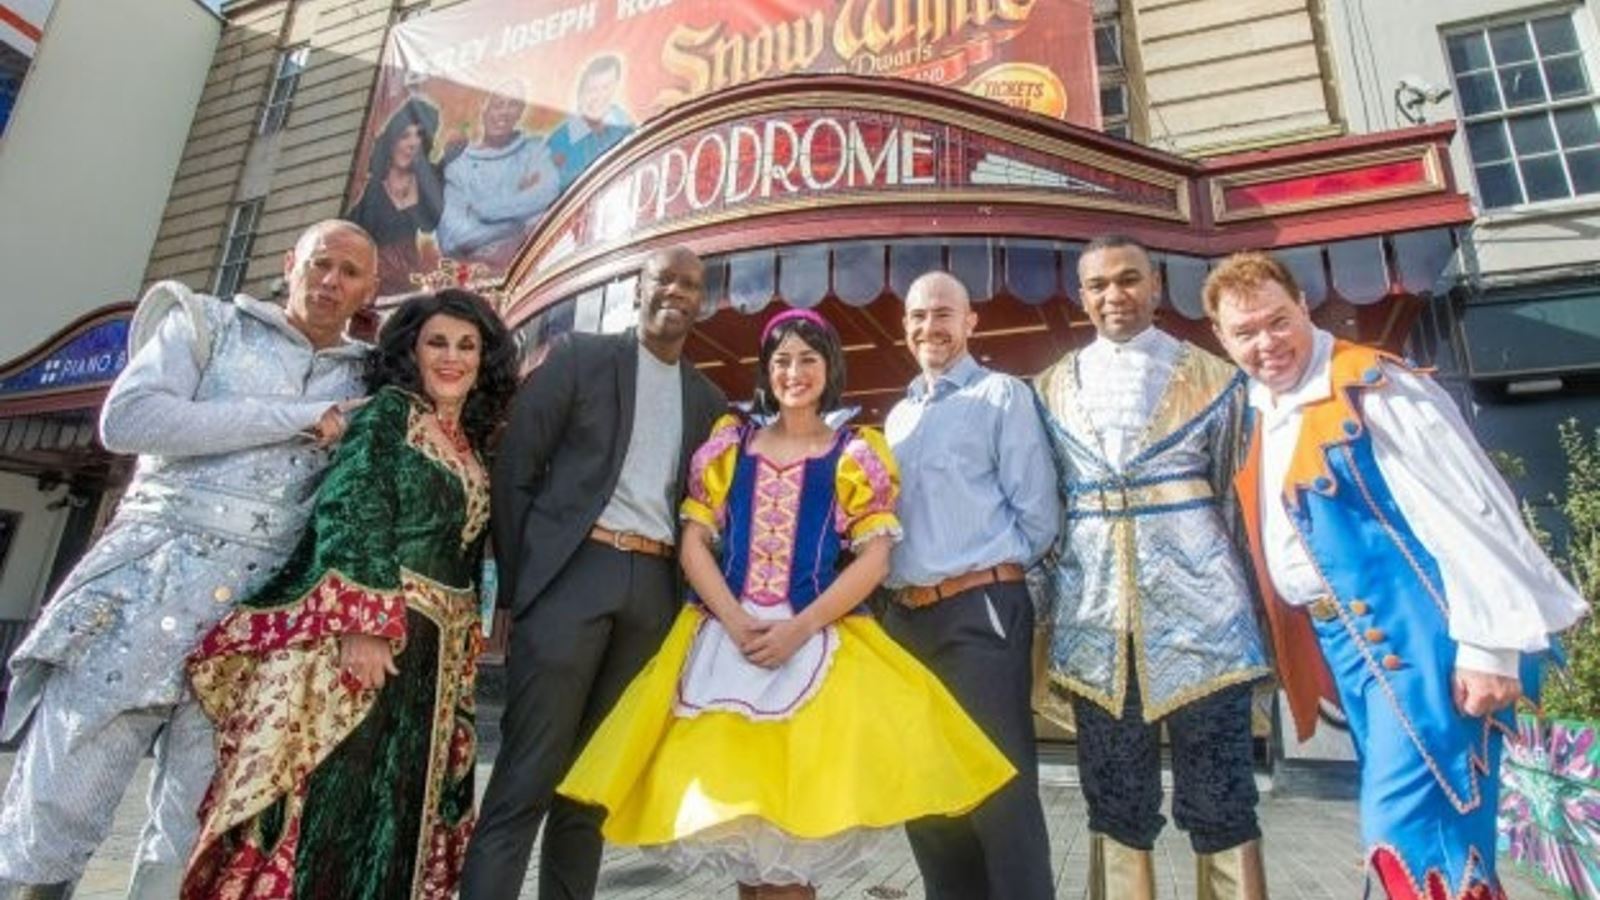 Pictured: The cast of Snow White, left to right (Rob Rinder), (Lesley Joseph), (Kurtis Reece - PR & Strategic Partnerships Executive at National Friendly), (Charlotte Haines), (Adrian Brown - Community & Events Manager at Southmead Hospital Charity), (Dale Mathurin), (Andy Ford)